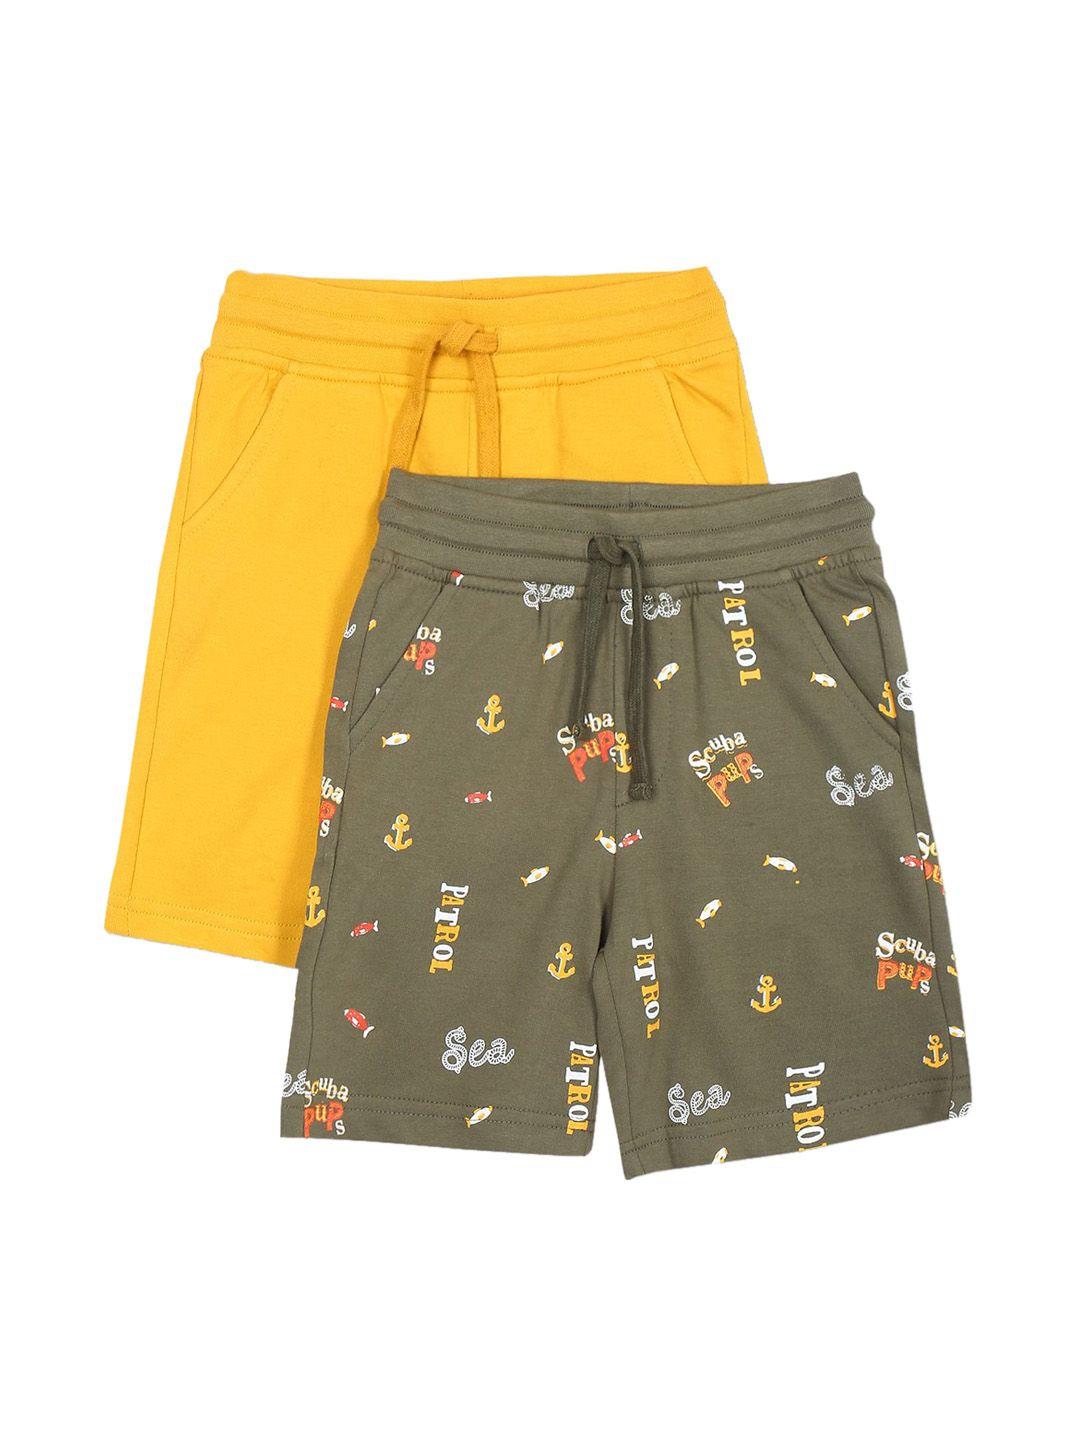 colt-boys-pack-of-2-assorted-printed-cotton-shorts